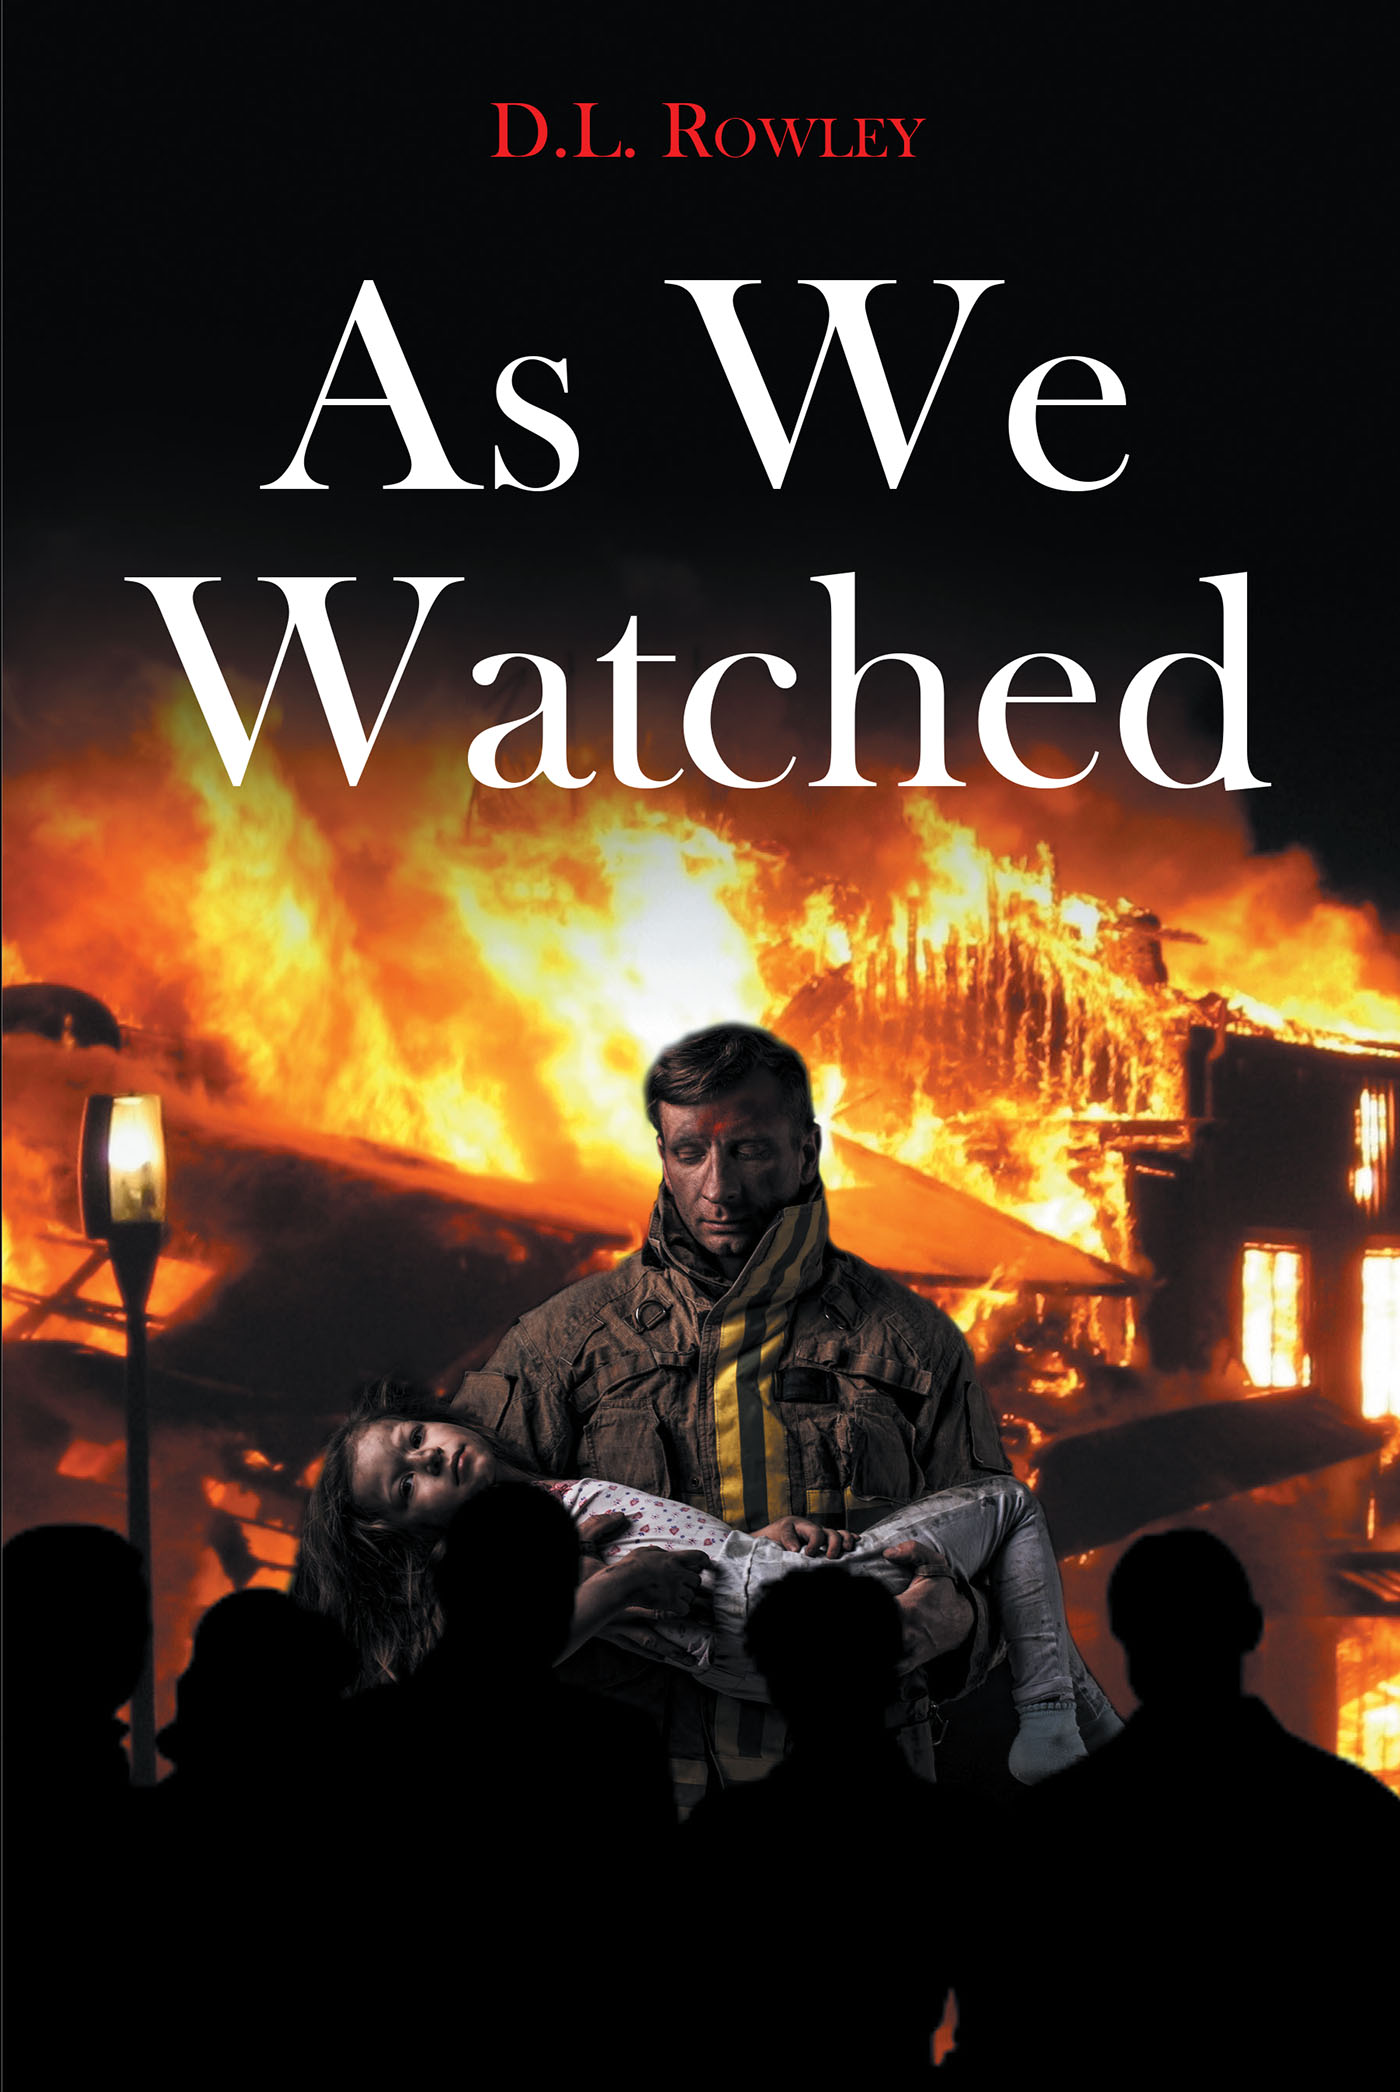 Author D.L. Rowley’s New Book, "As We Watched," is a Riveting Story Pitting the US Military Against Malignant Terrorist Forces Bent on the Destruction of American Life